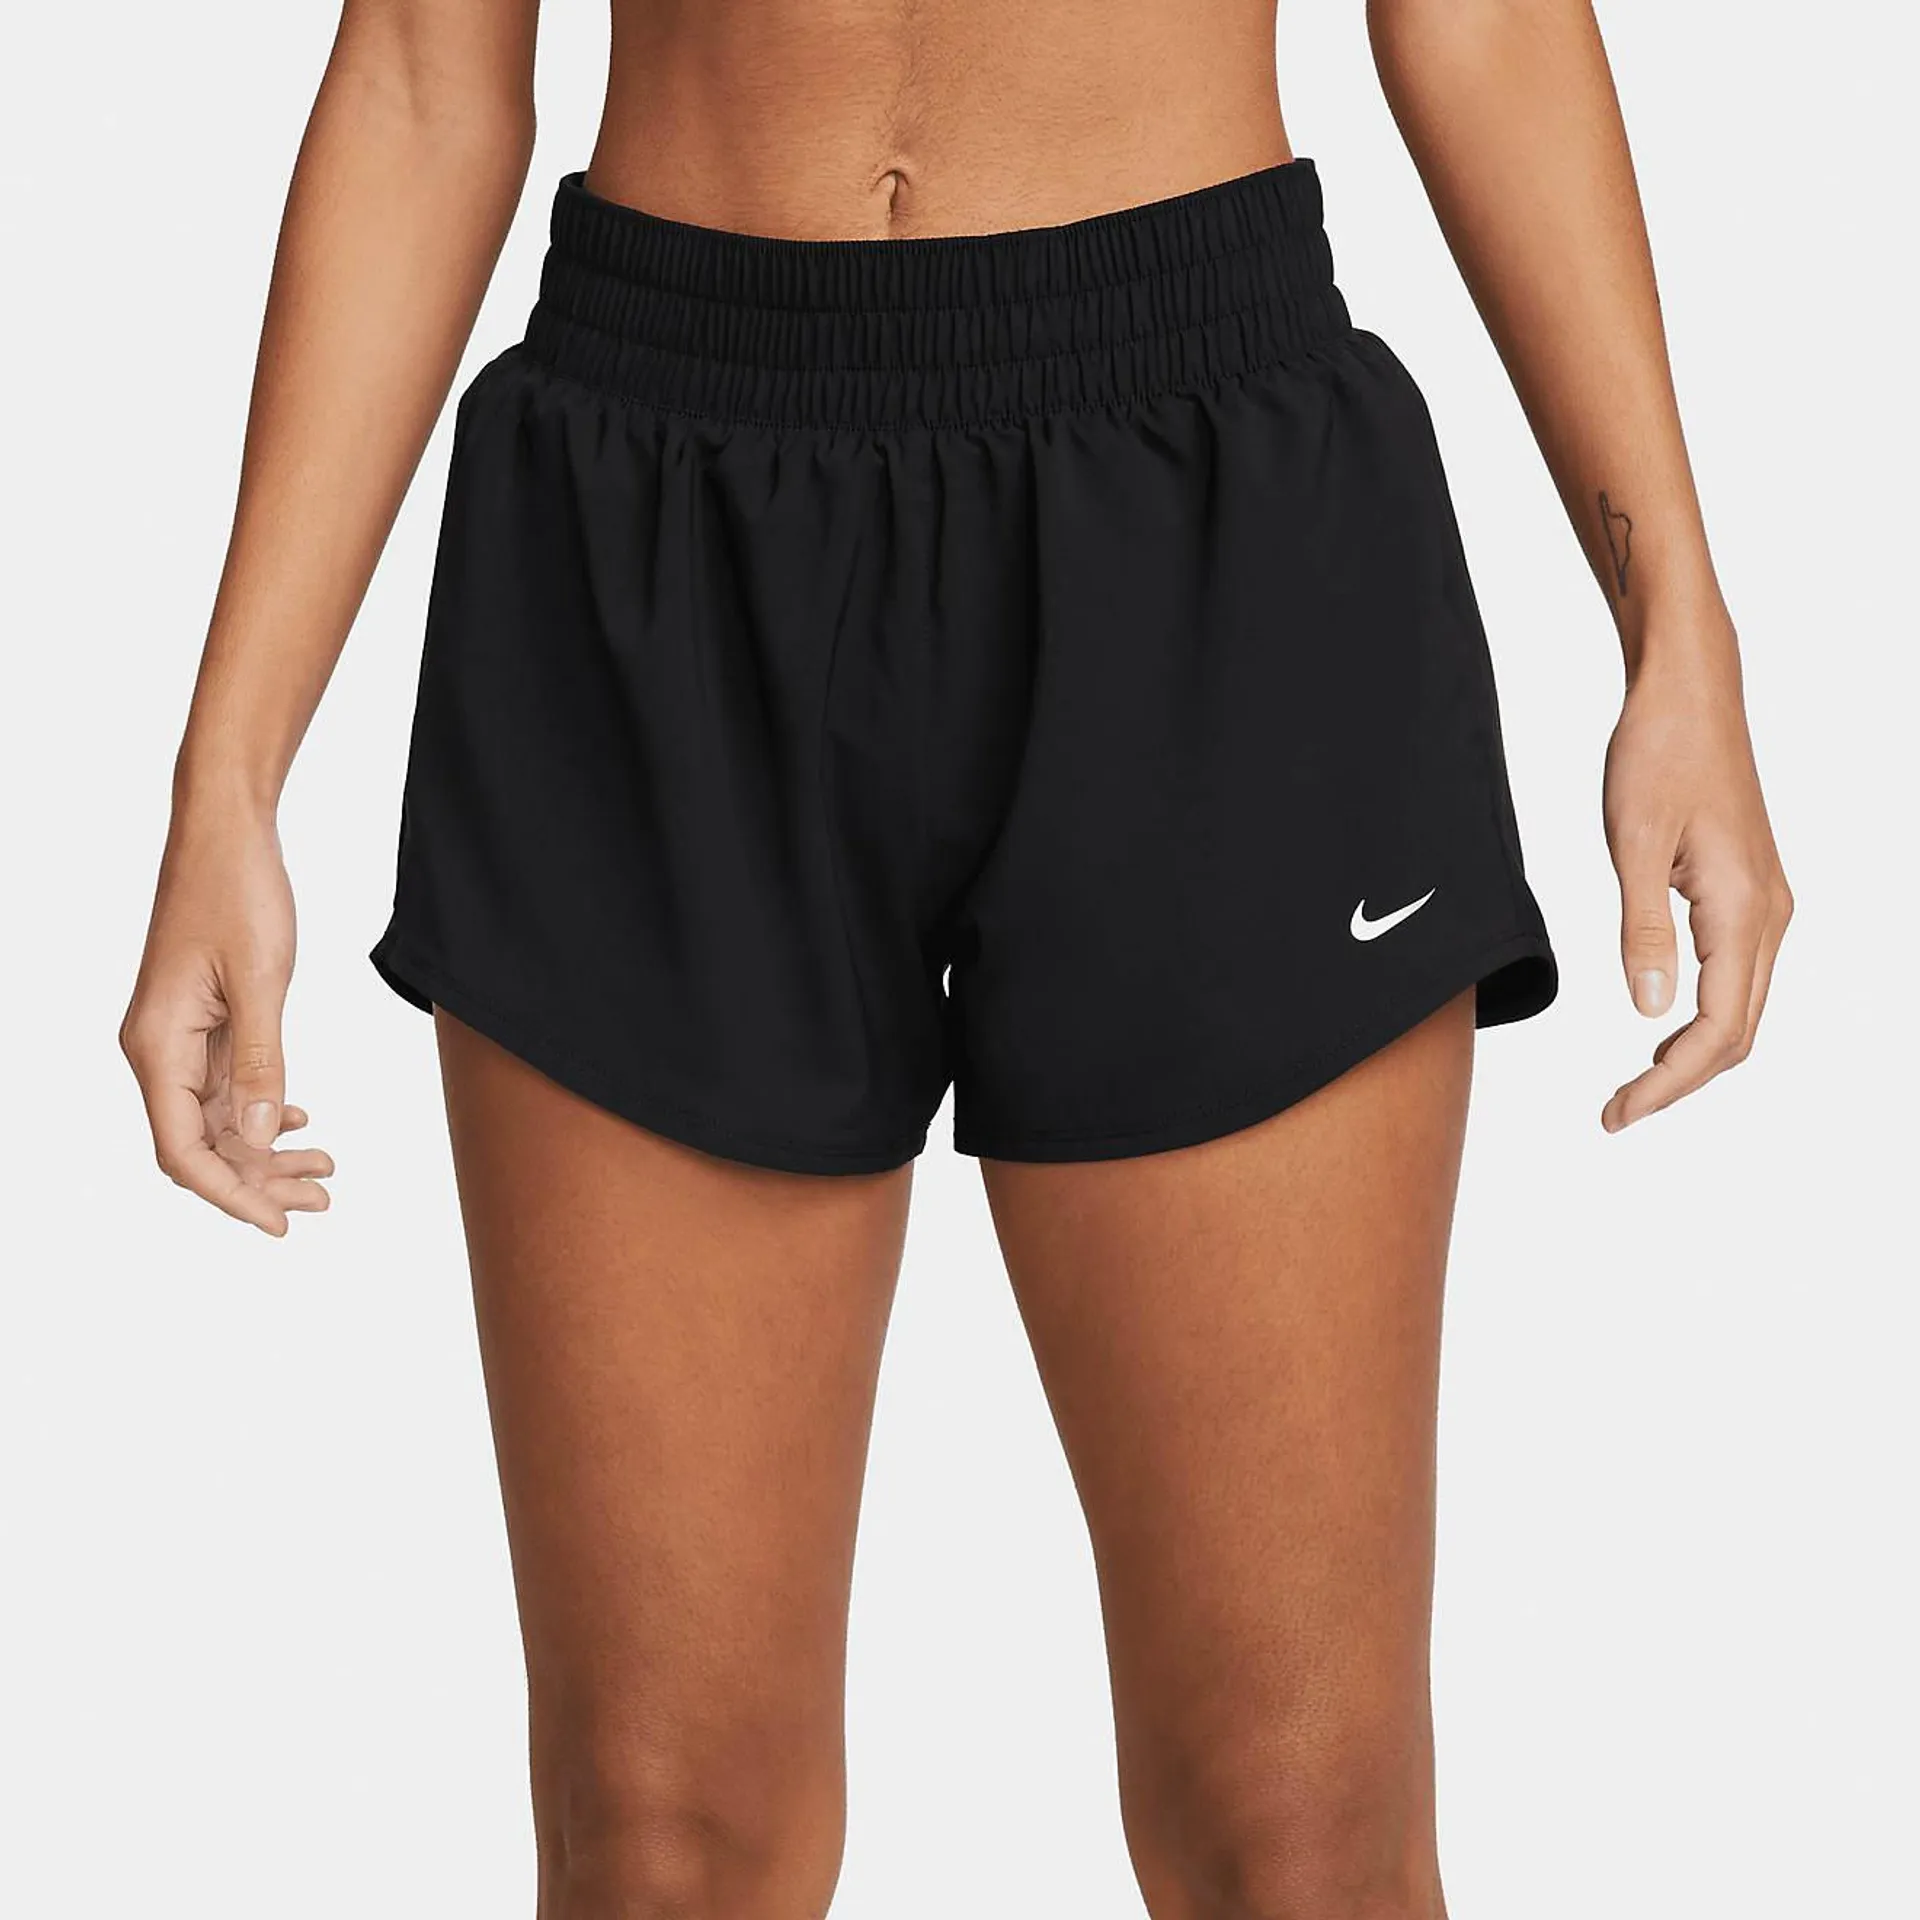 Nike Women's One Dri-FIT Mid-Rise Shorts 3in